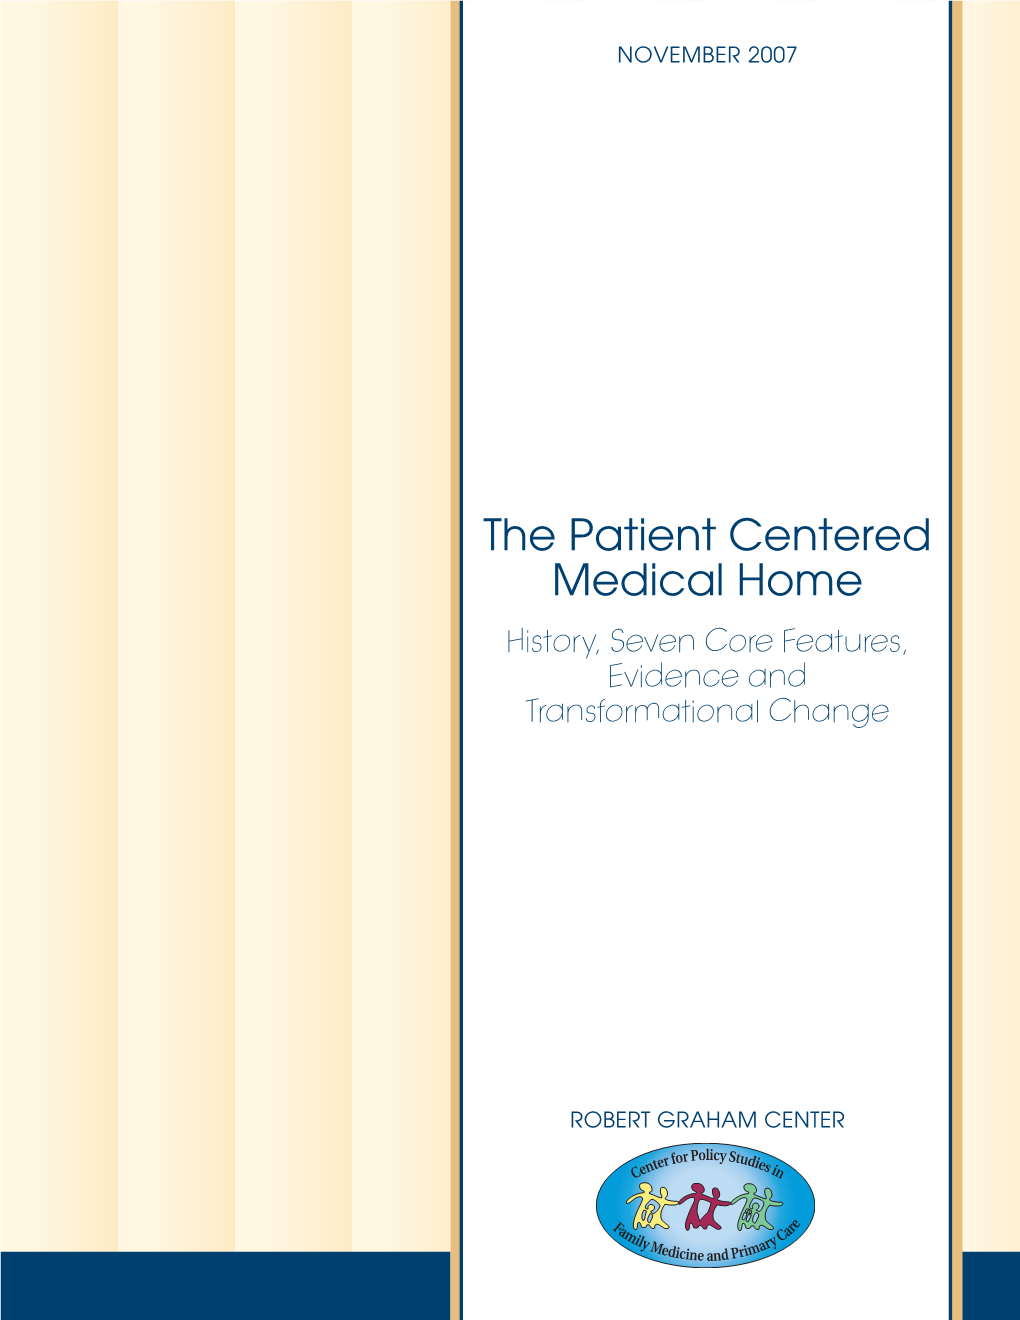 The Patient Centered Medical Home: History, Seven Core Features